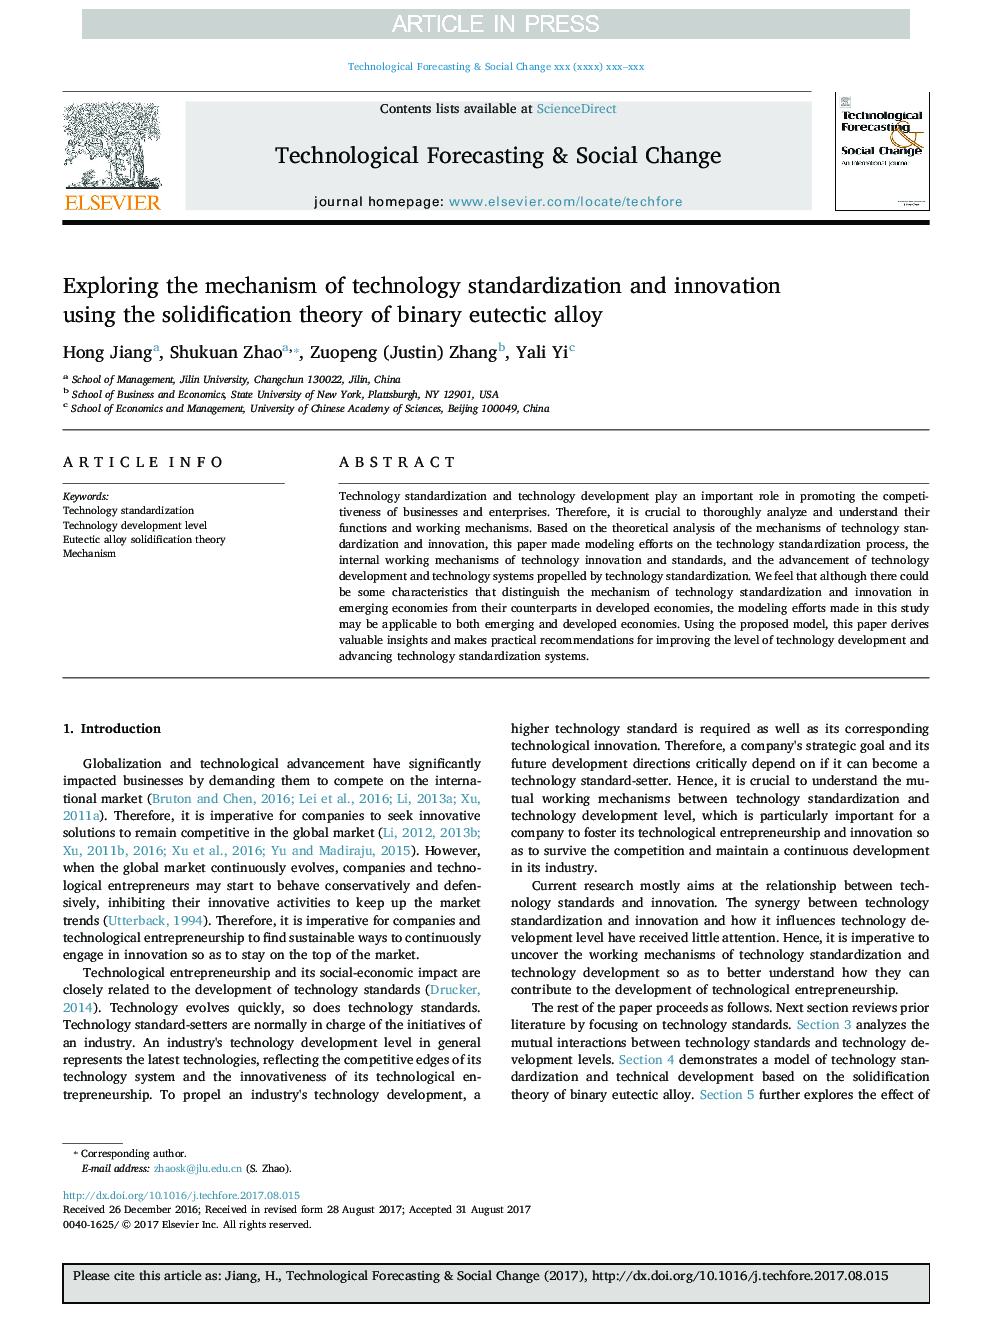 Exploring the mechanism of technology standardization and innovation using the solidification theory of binary eutectic alloy